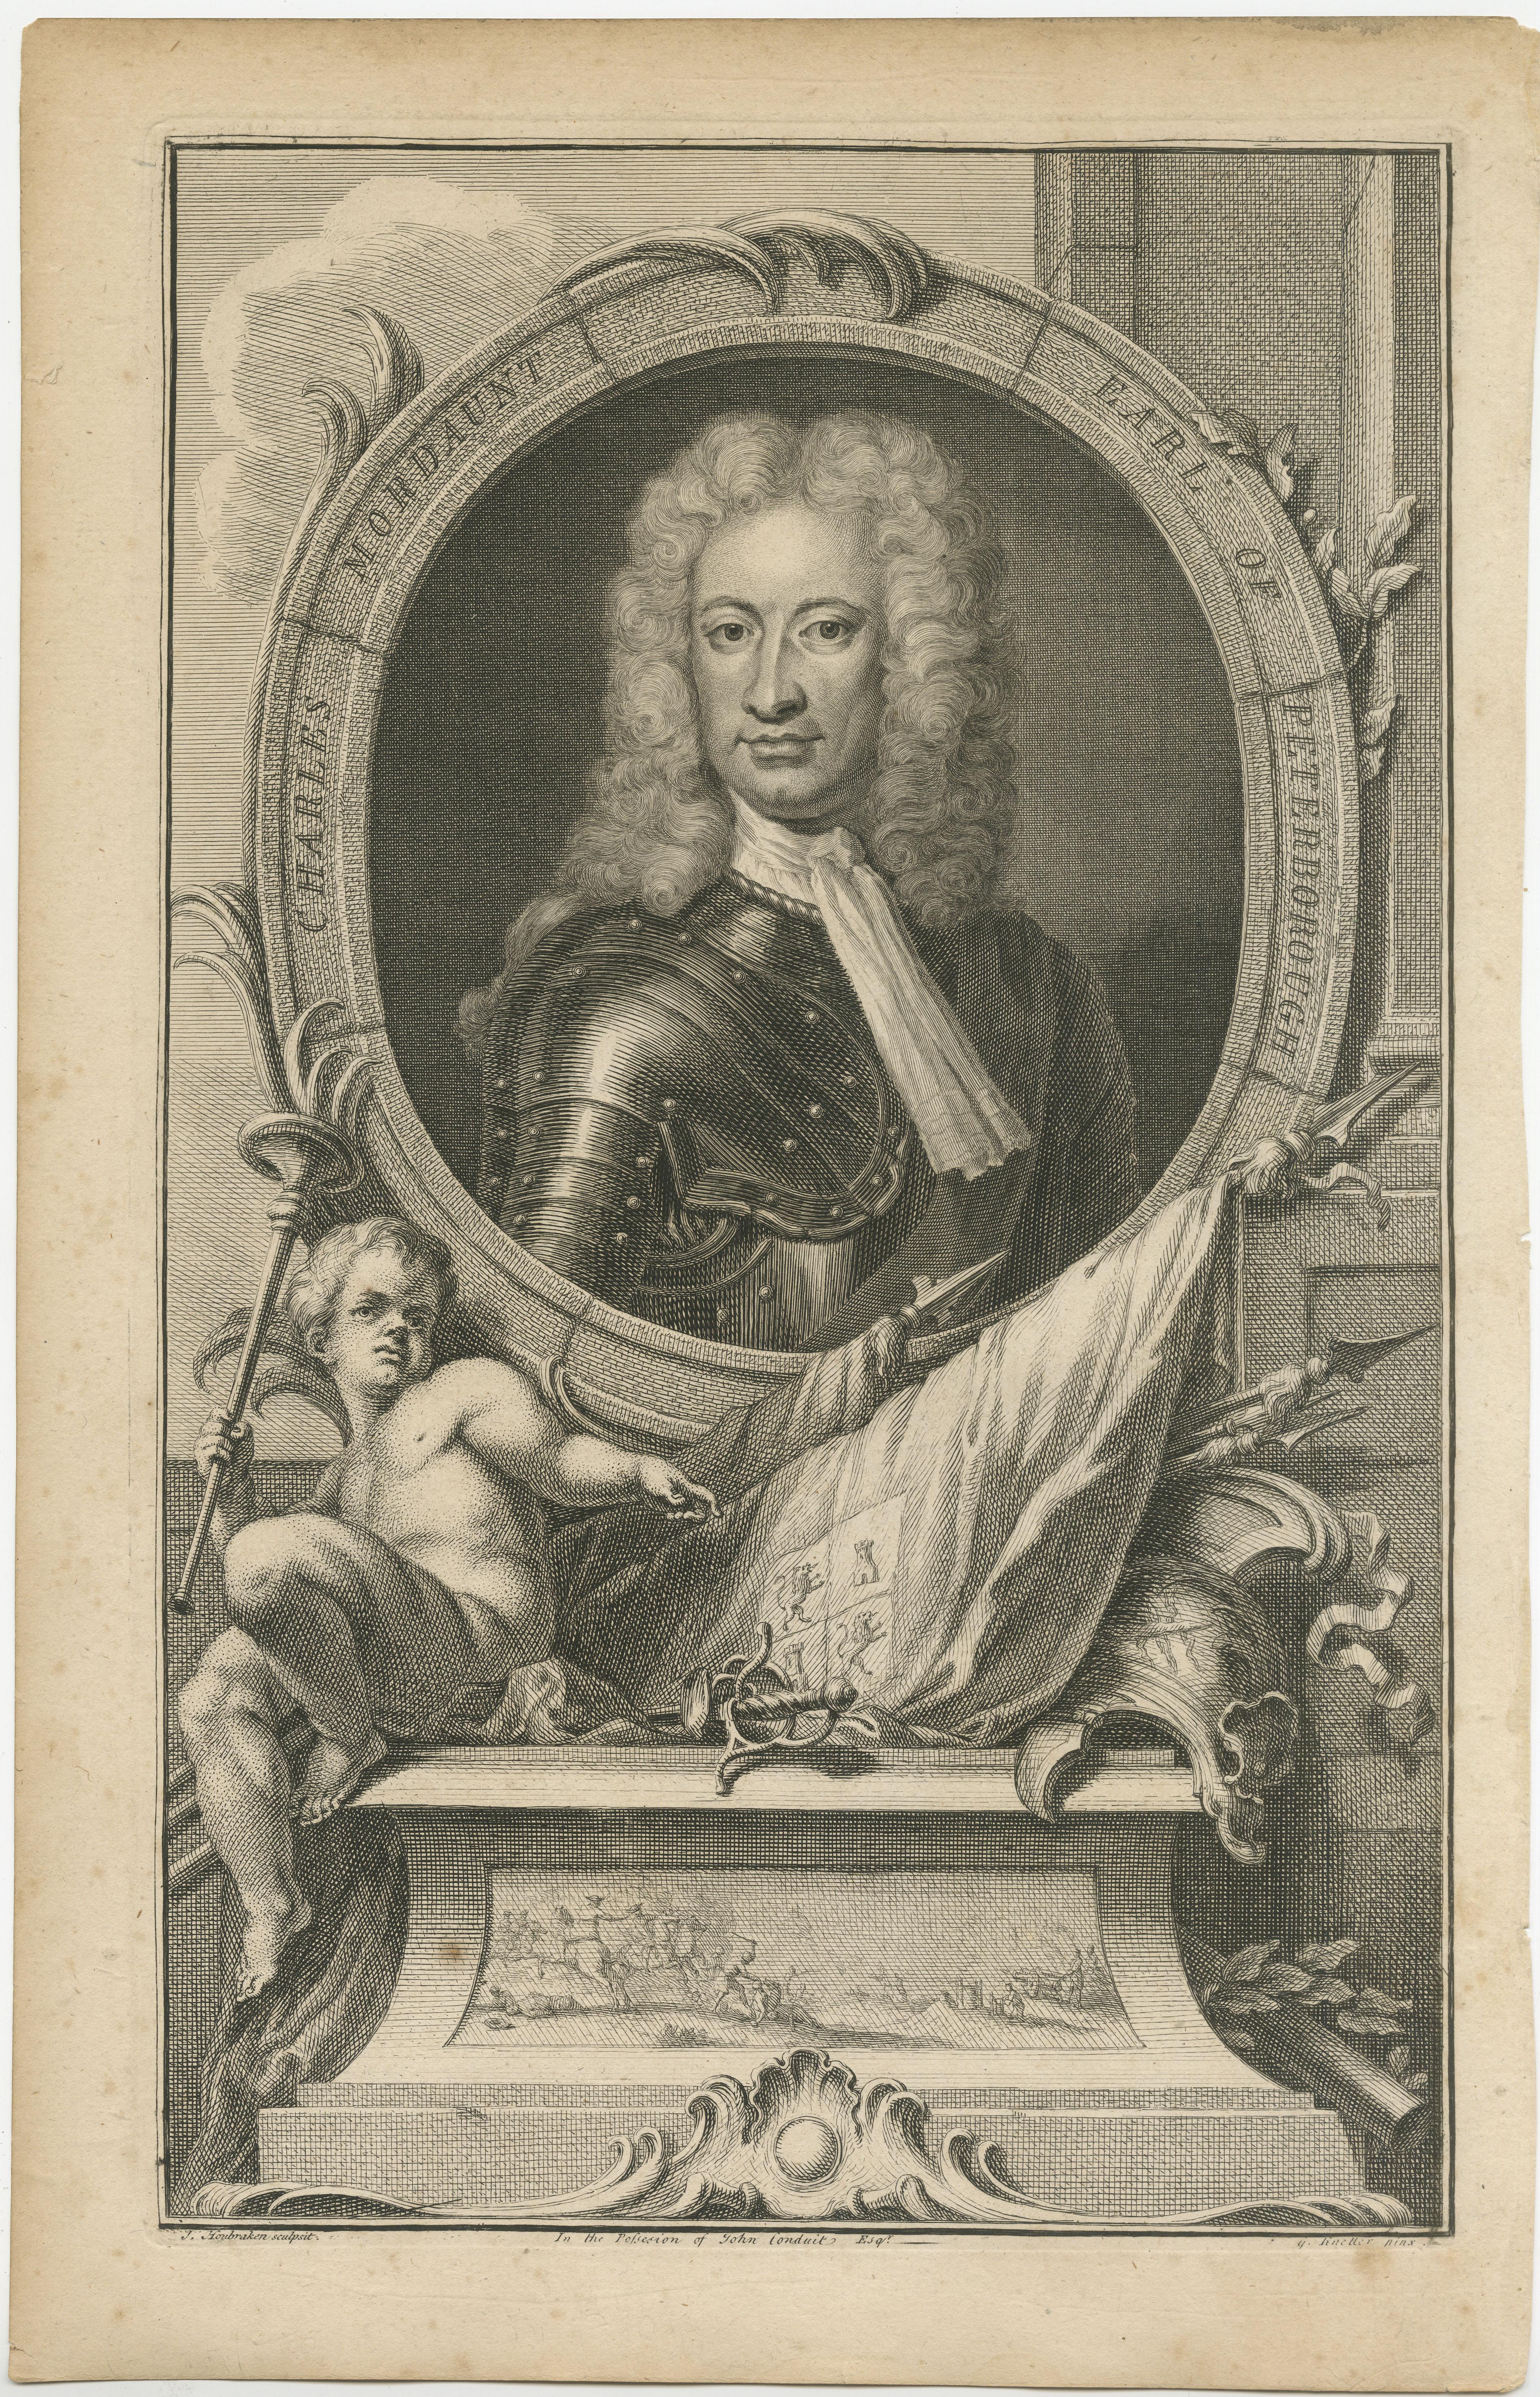 Antique portrait titled 'Charles Mordaunt Earl of Peterborough'. Charles Mordaunt, 3rd Earl of Peterborough and 1st Earl of Monmouth, KG, PC (1658 – 25 October 1735) was an English nobleman and military leader. He was the son of John Mordaunt, 1st